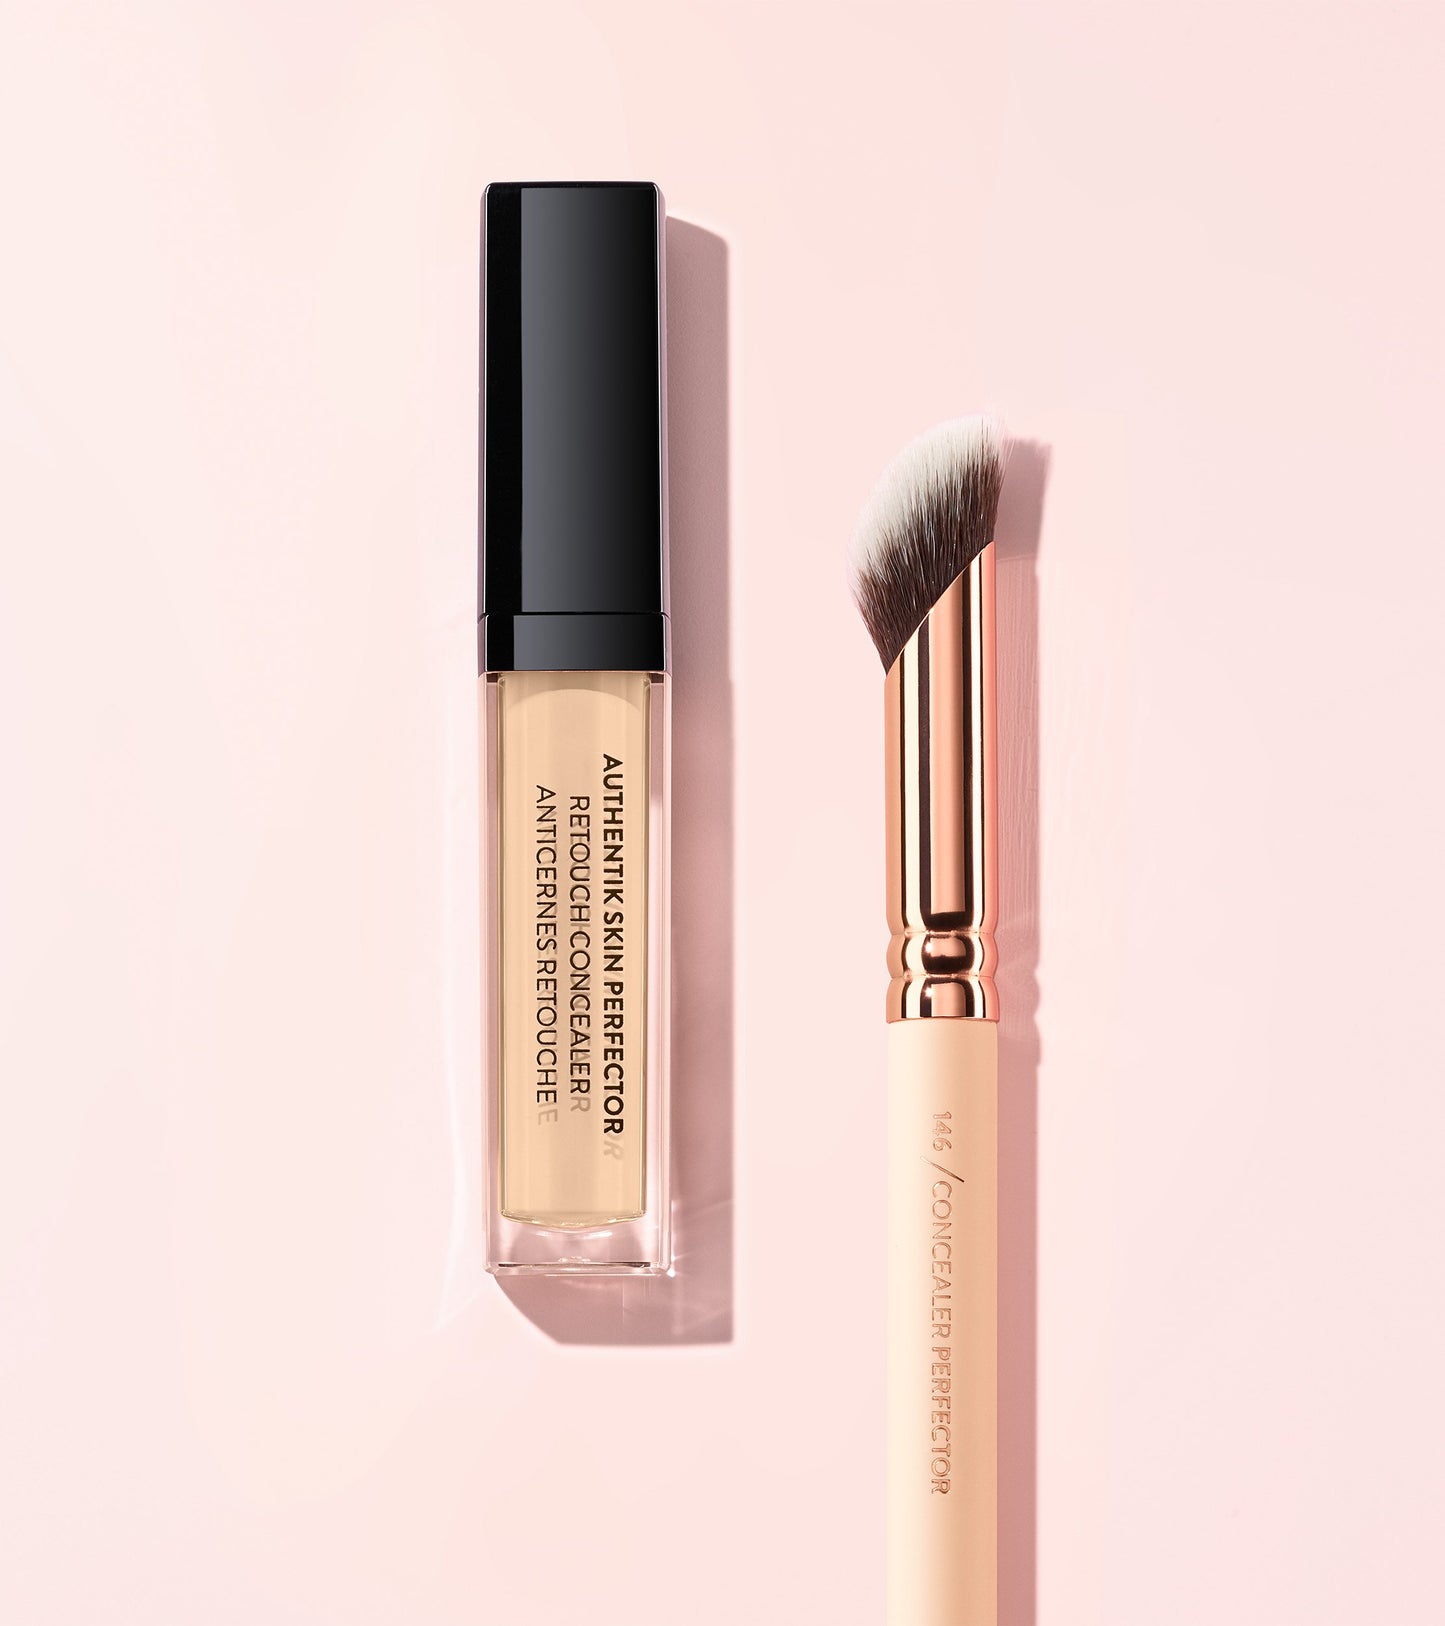 AUTHENTIK SKIN PERFECTOR CONCEALER (120 EVIDENT) Expanded Image 3